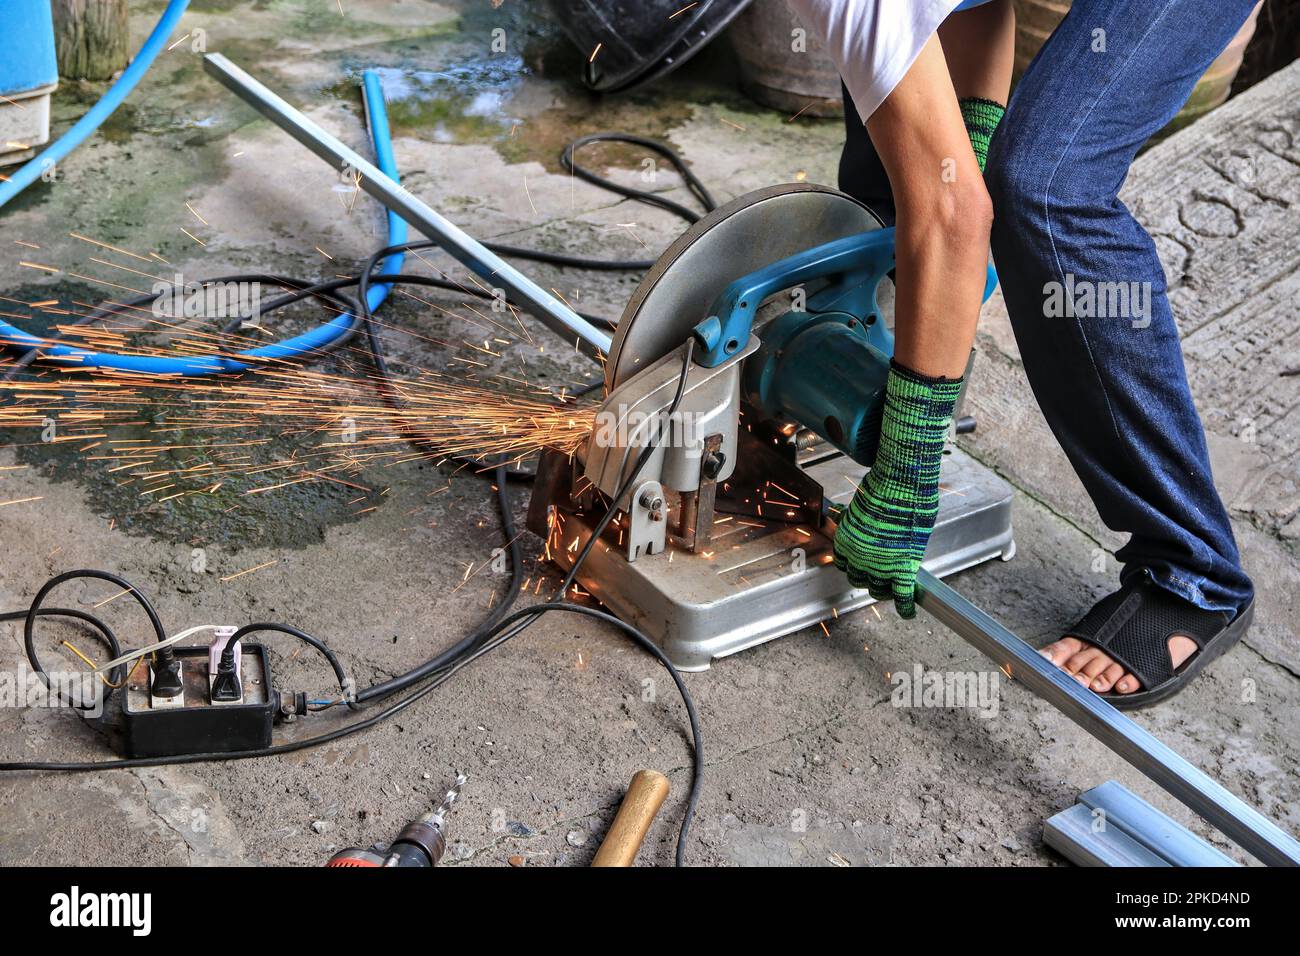 A worker uses a steel cutter to create a large number of sparks. and place various tools recklessly placed near a water source may cause a short circu Stock Photo